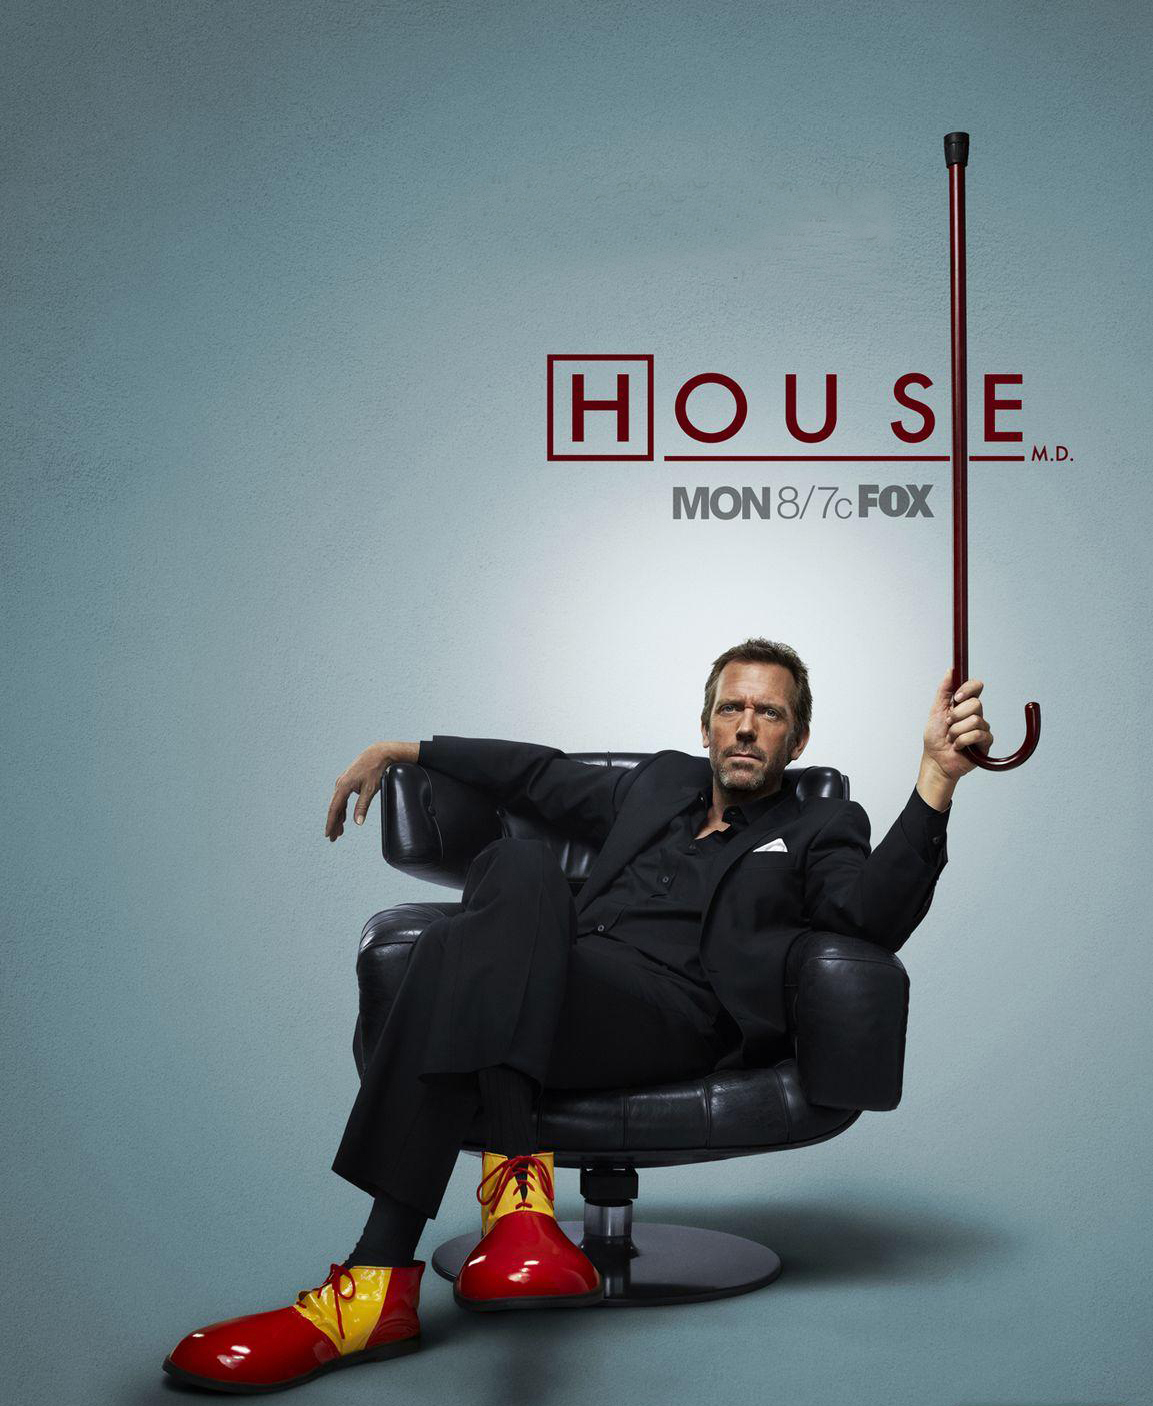 http://images4.fanpop.com/image/photos/18000000/House-Season-7-New-Promotional-Poster-HQ-house-md-18076807-1153-1406.jpg